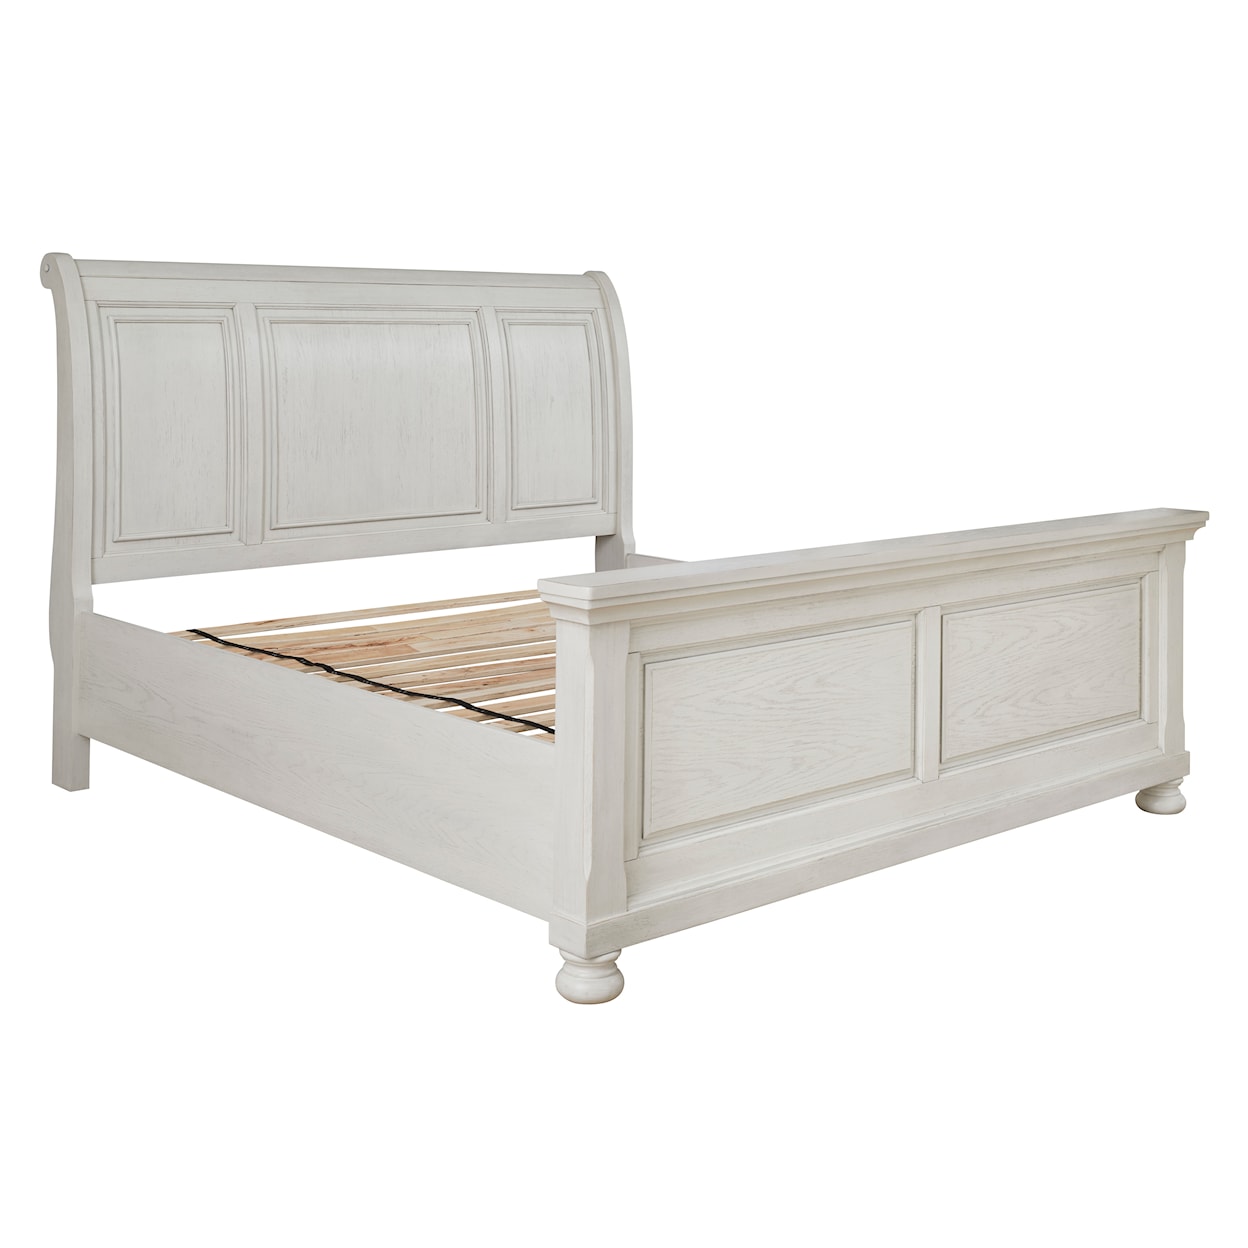 Ashley Furniture Signature Design Robbinsdale King Sleigh Bed